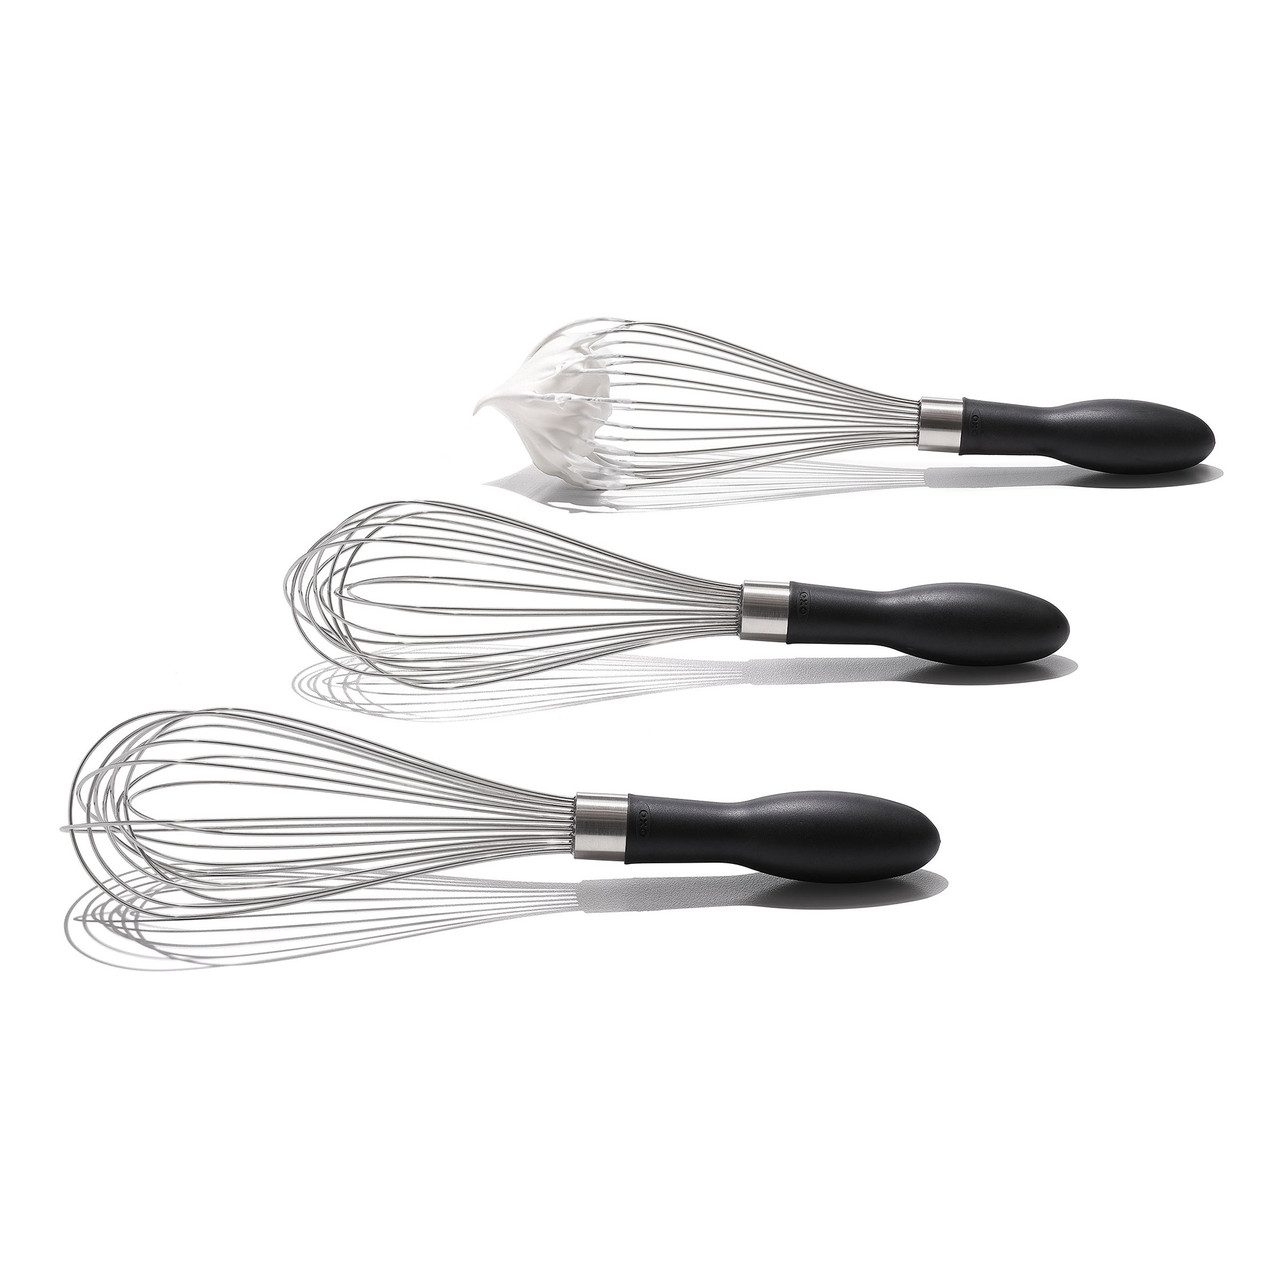 OXO Good Grips 11 1/2 Balloon Whip / Whisk with Rubber Handle 74291